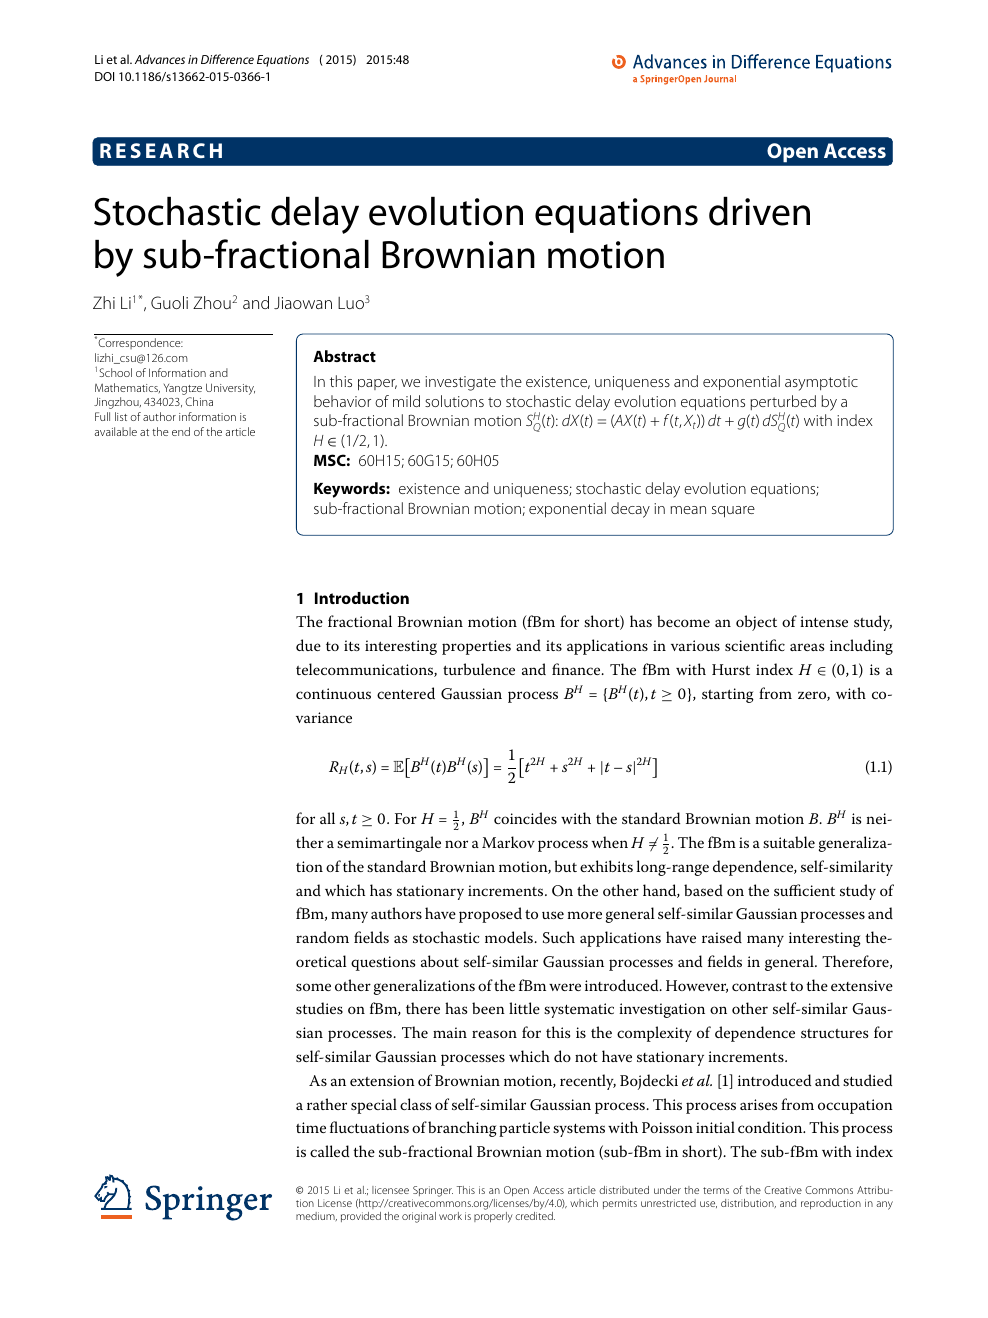 Stochastic Delay Evolution Equations Driven By Sub Fractional Brownian Motion Topic Of Research Paper In Mathematics Download Scholarly Article Pdf And Read For Free On Cyberleninka Open Science Hub